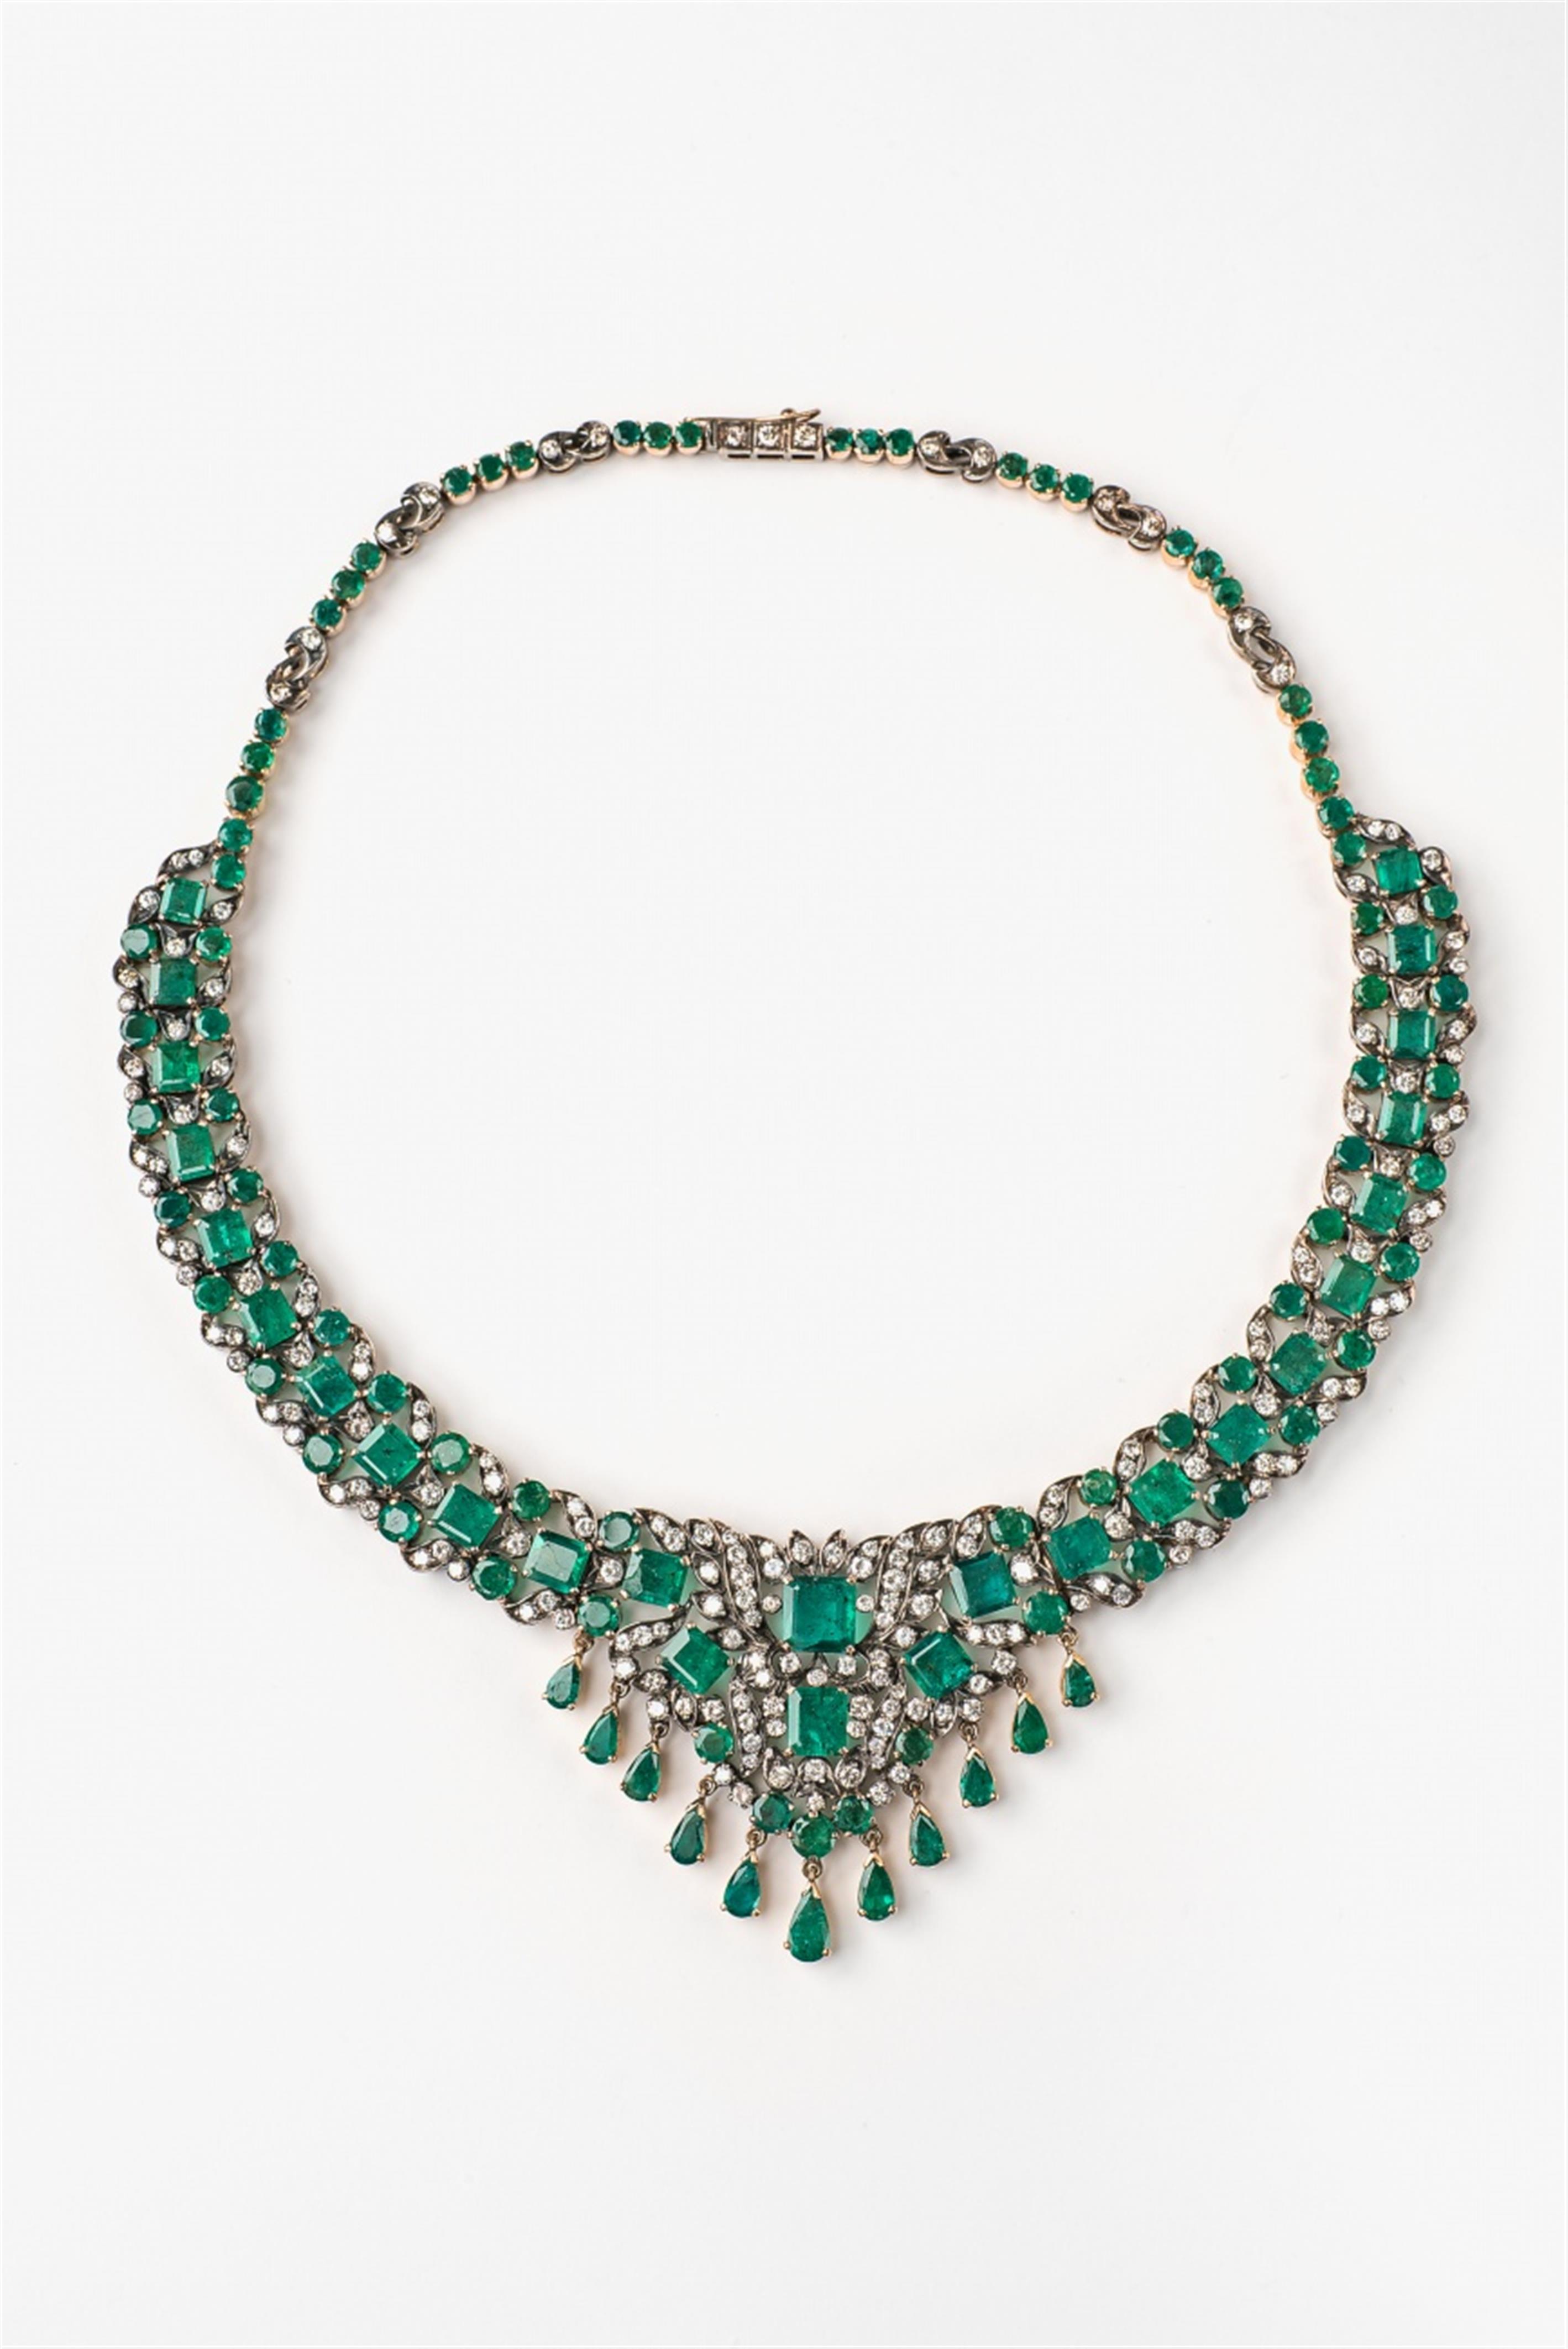 A 14k gold emerald and diamond necklace - image-1